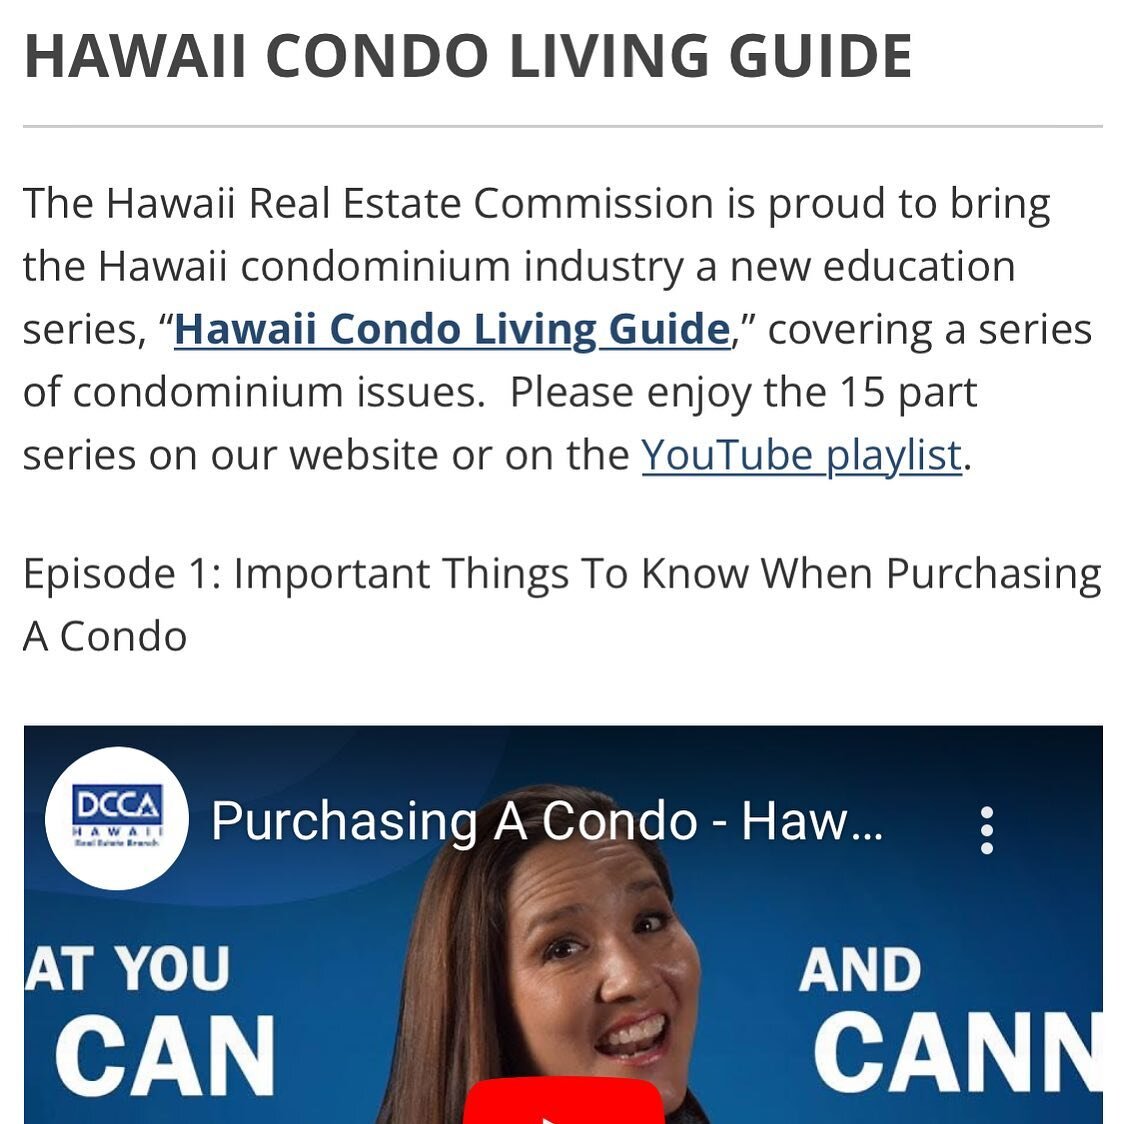 Thinking about buying a condo?  It could be a great option but let me tell you, they're not for everyone. The DCCA has created this incredibly helpful resource to help you decide if it's the right move for you. Check out the
Hawaii Condo Living Guide